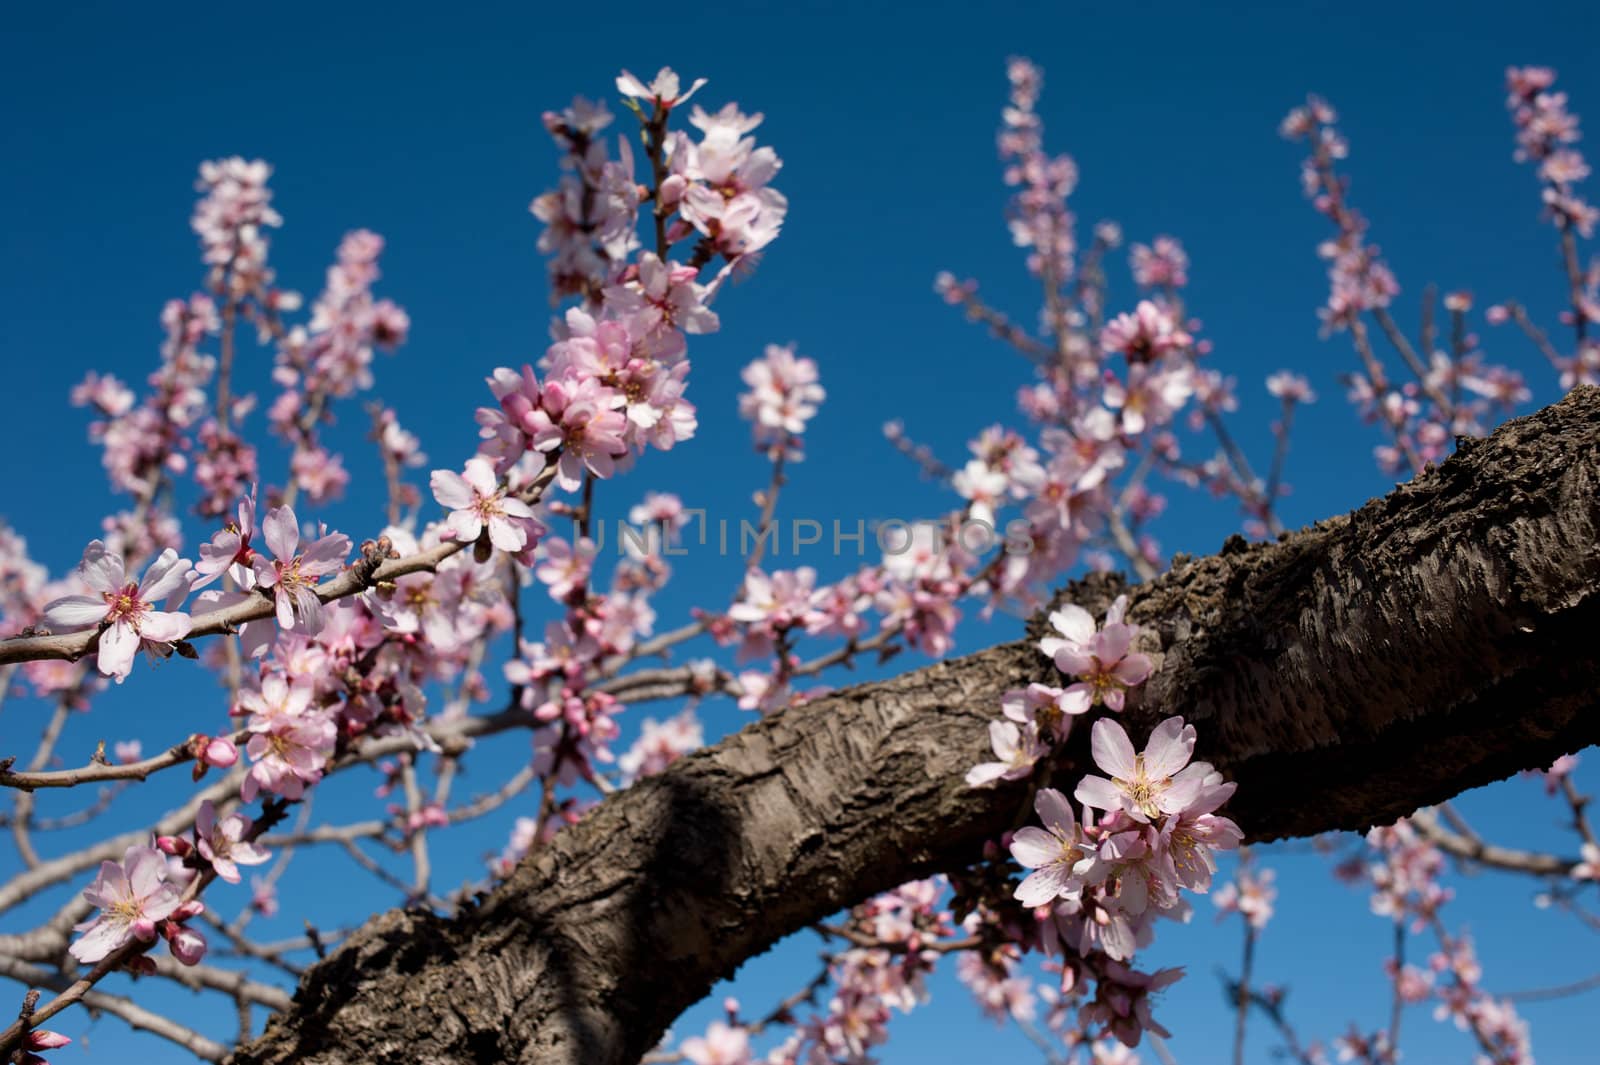 Dry branch of an old almond tree flowering